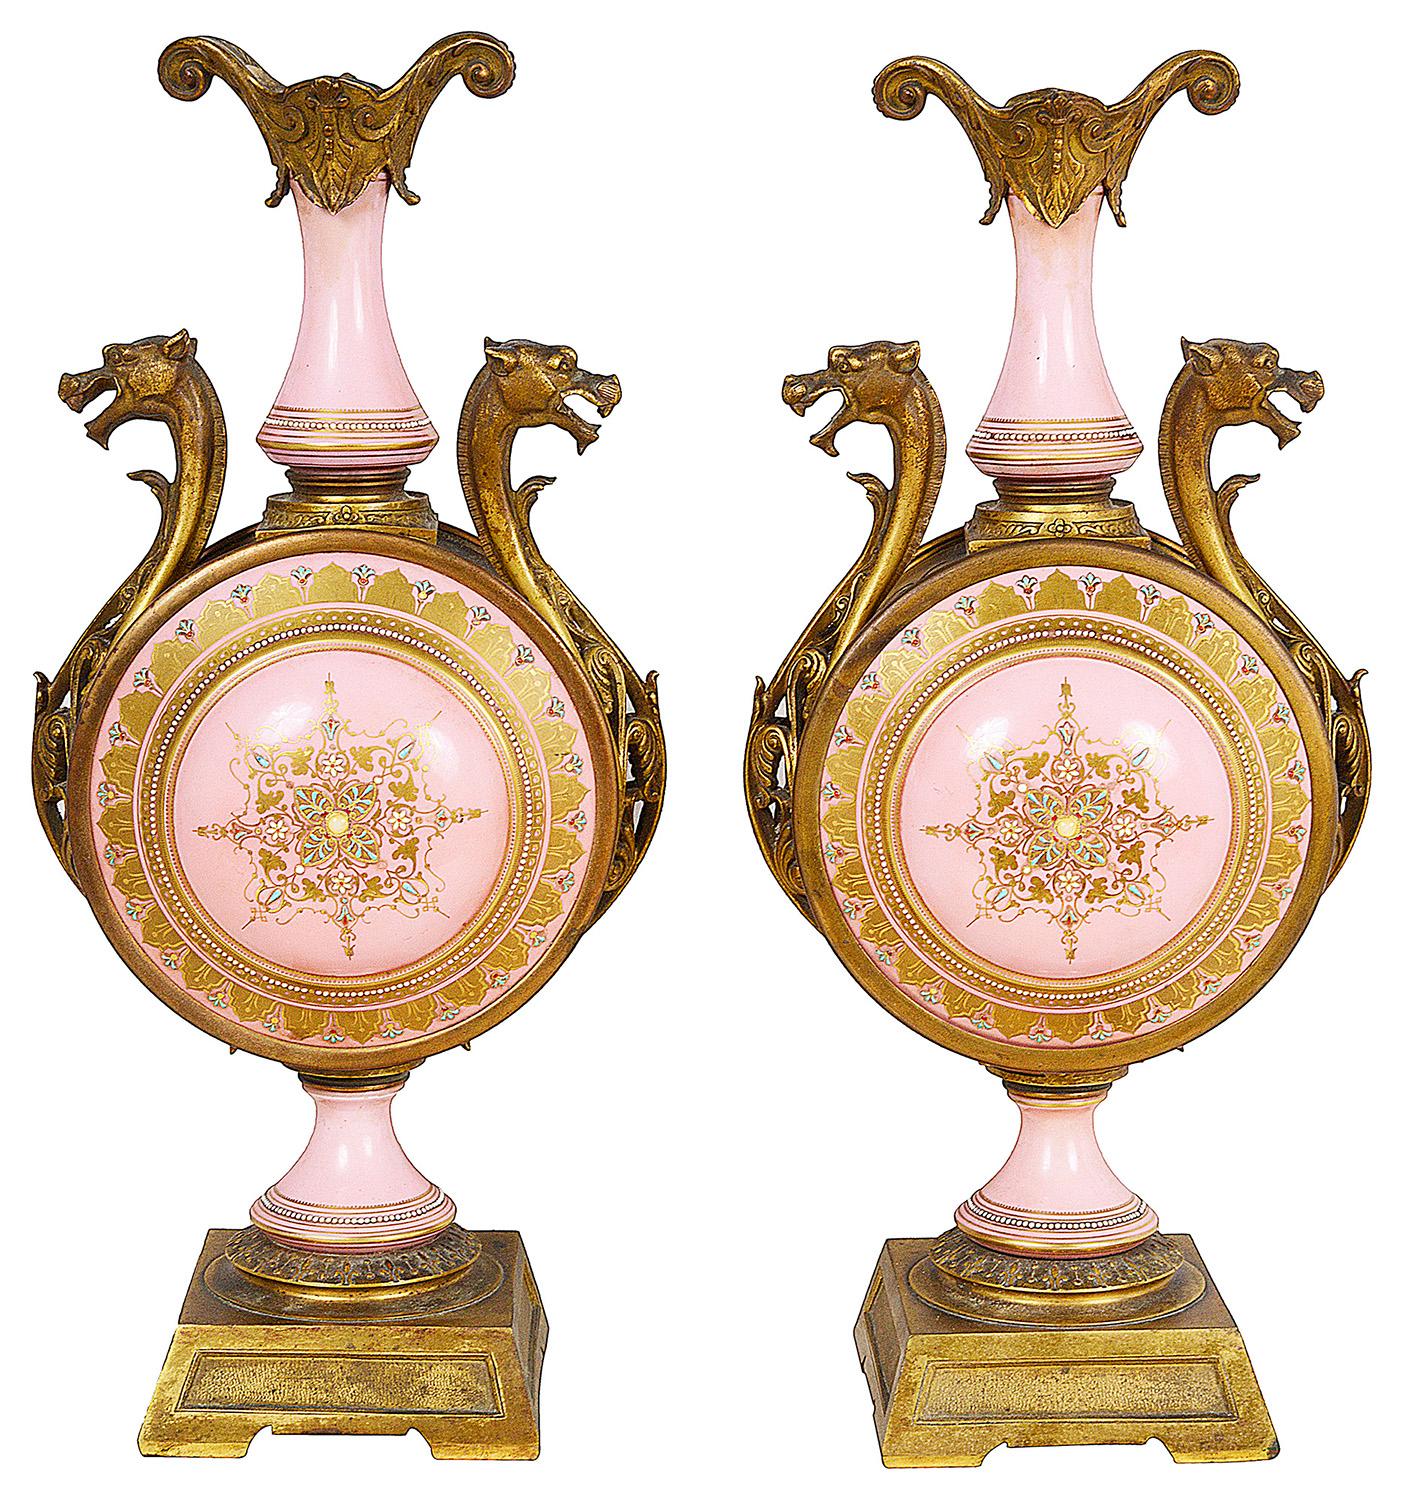 A very decorative pair of 19th Century French Sevres style two handled pink porcelain vases, each with gilded ormolu mounts, hand painted scenes of reclined maidens with cherubs playing.